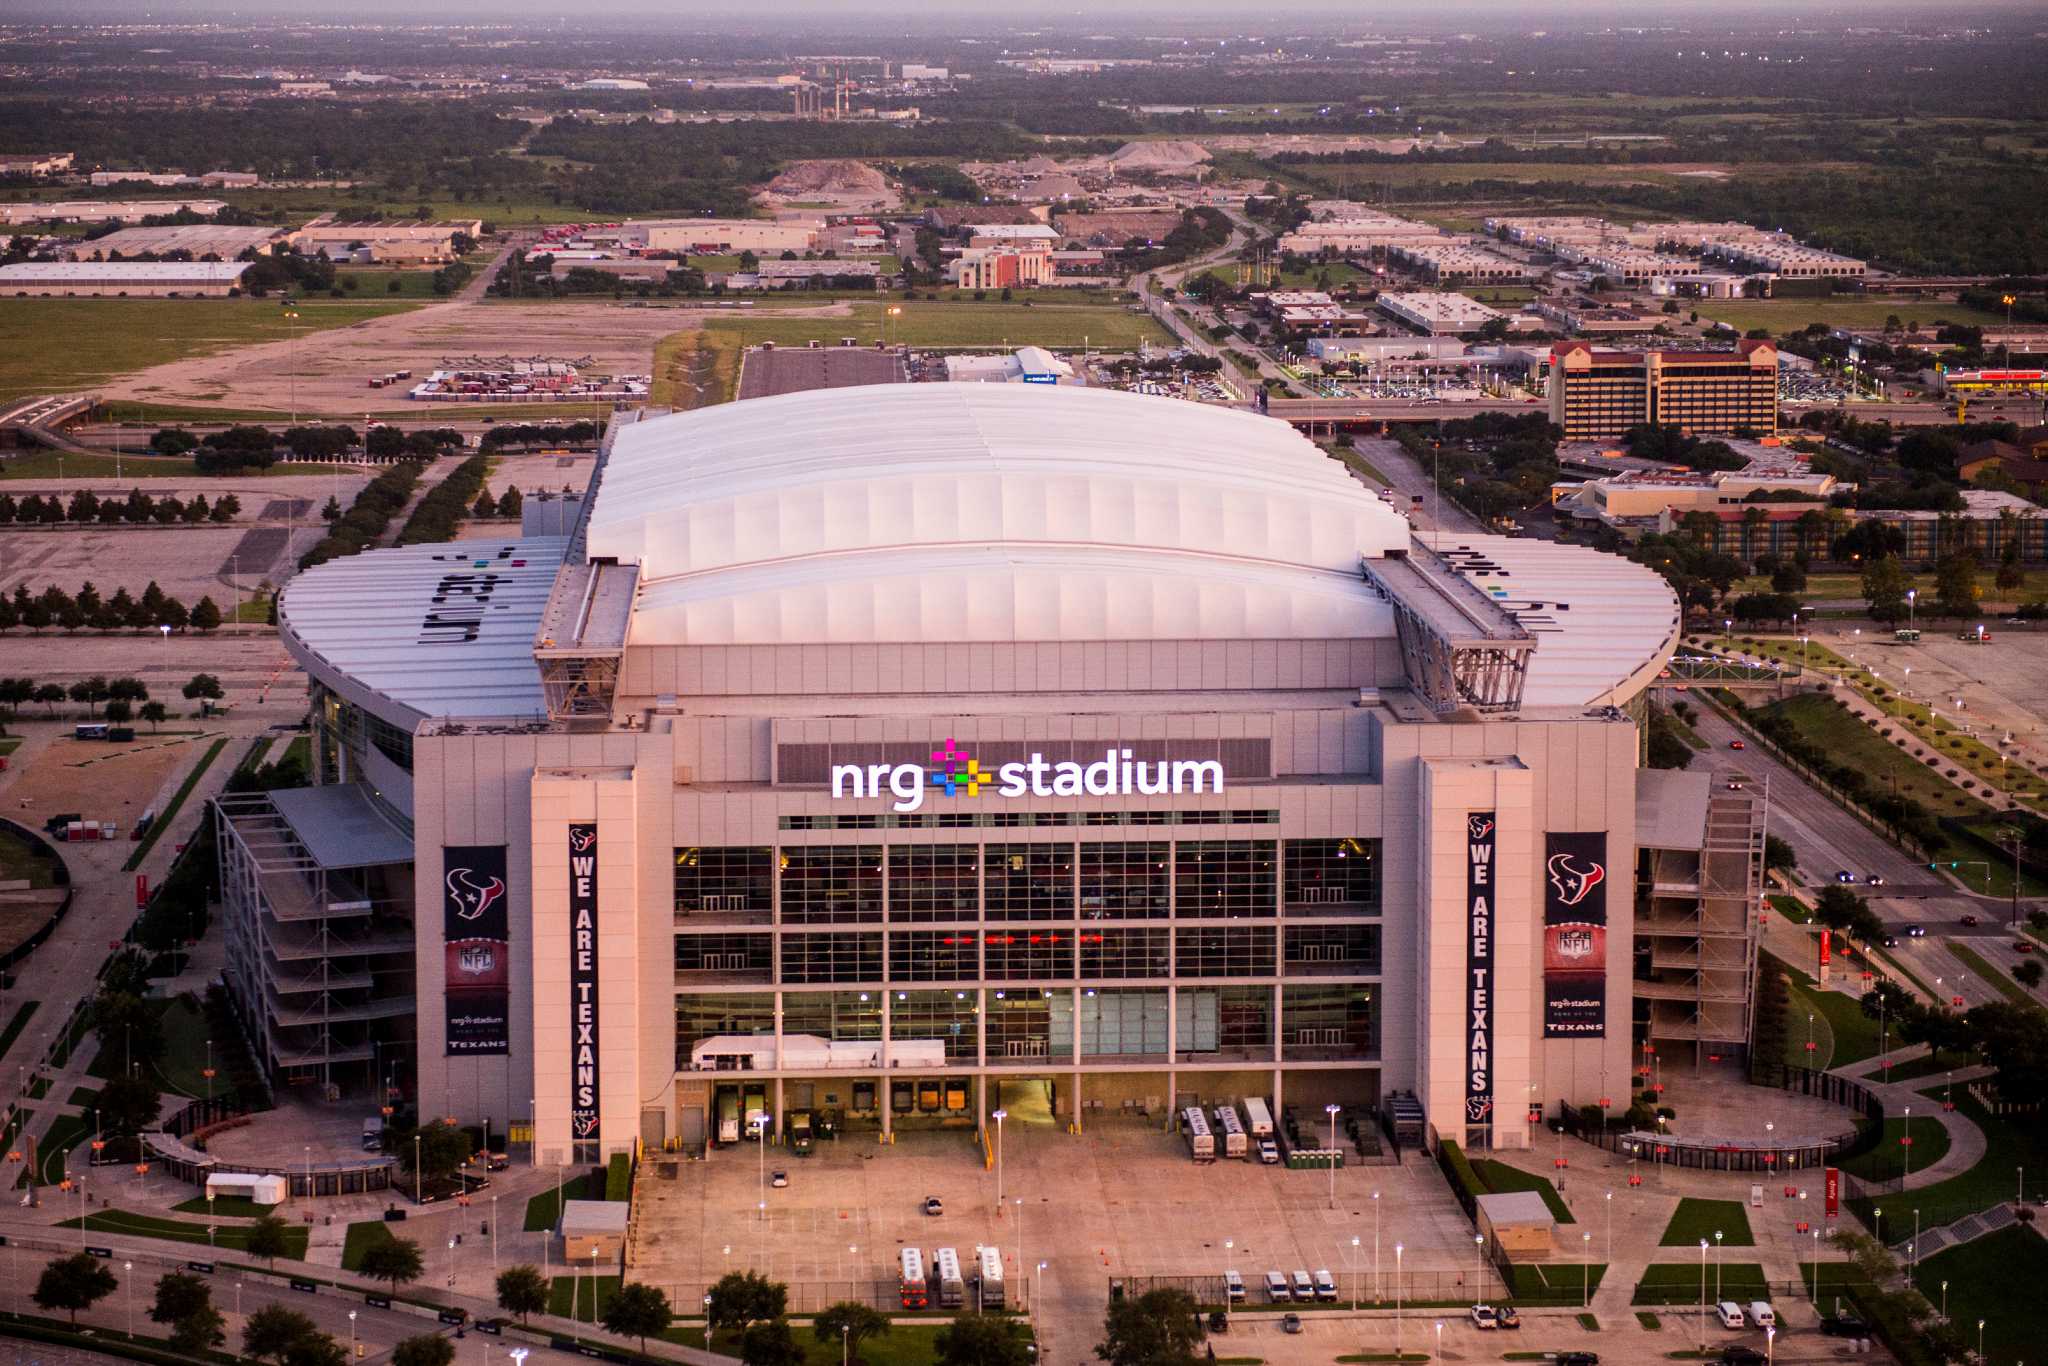 NRG is the cleanest stadium in the NFL